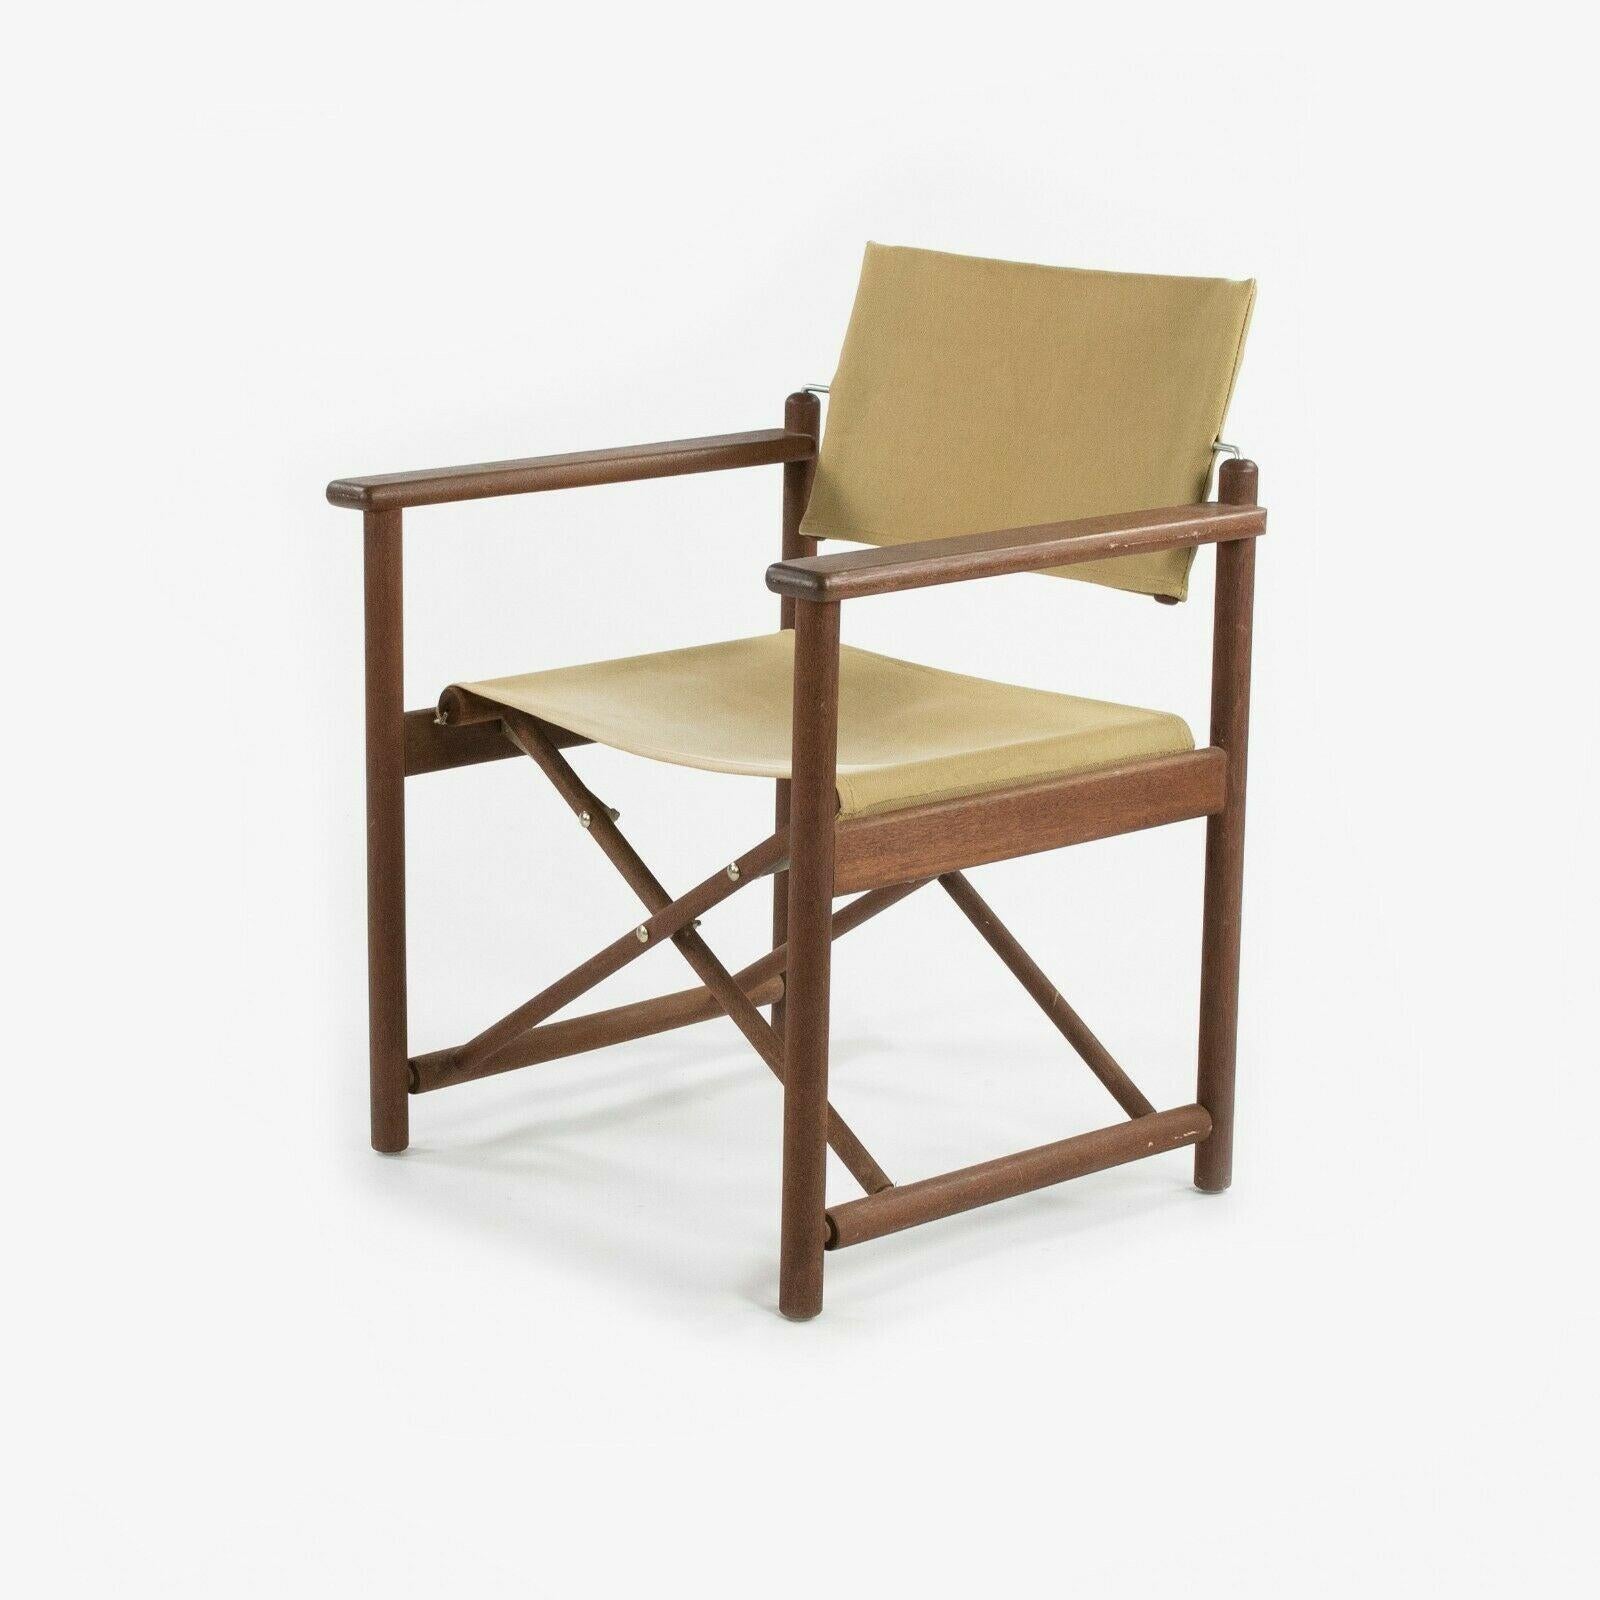 1960s Danish Modern Walnut and Canvas Folding Campaign Chair For Sale 6